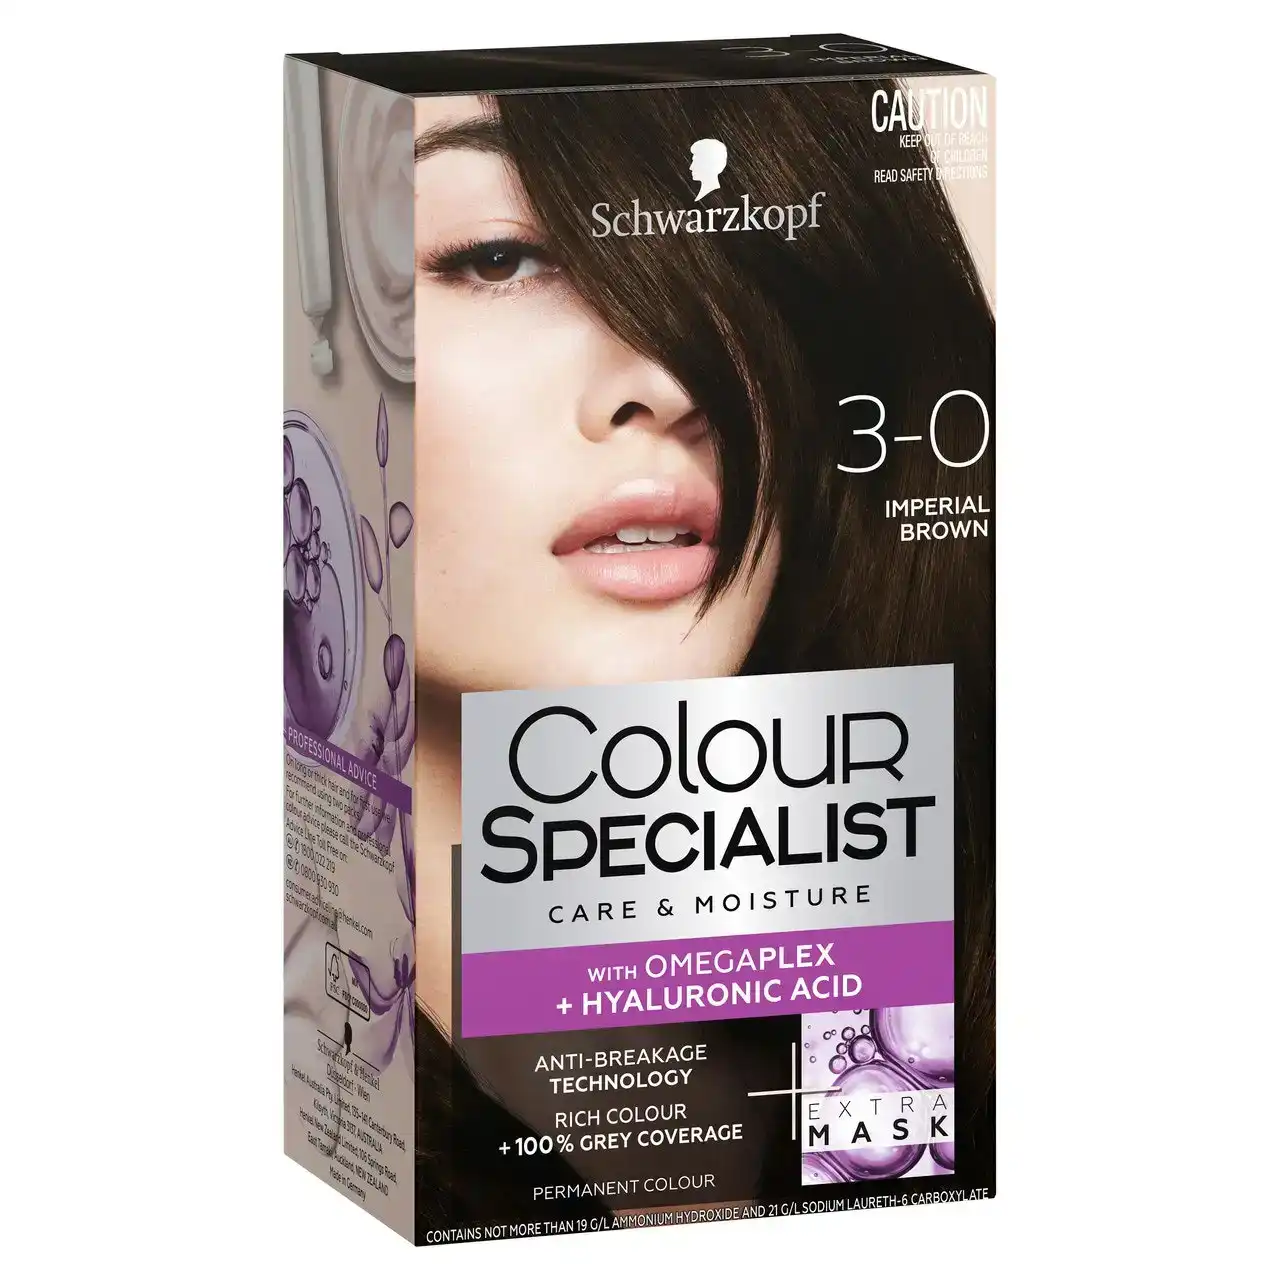 Colour Specialist 3.0 Imperial Brown